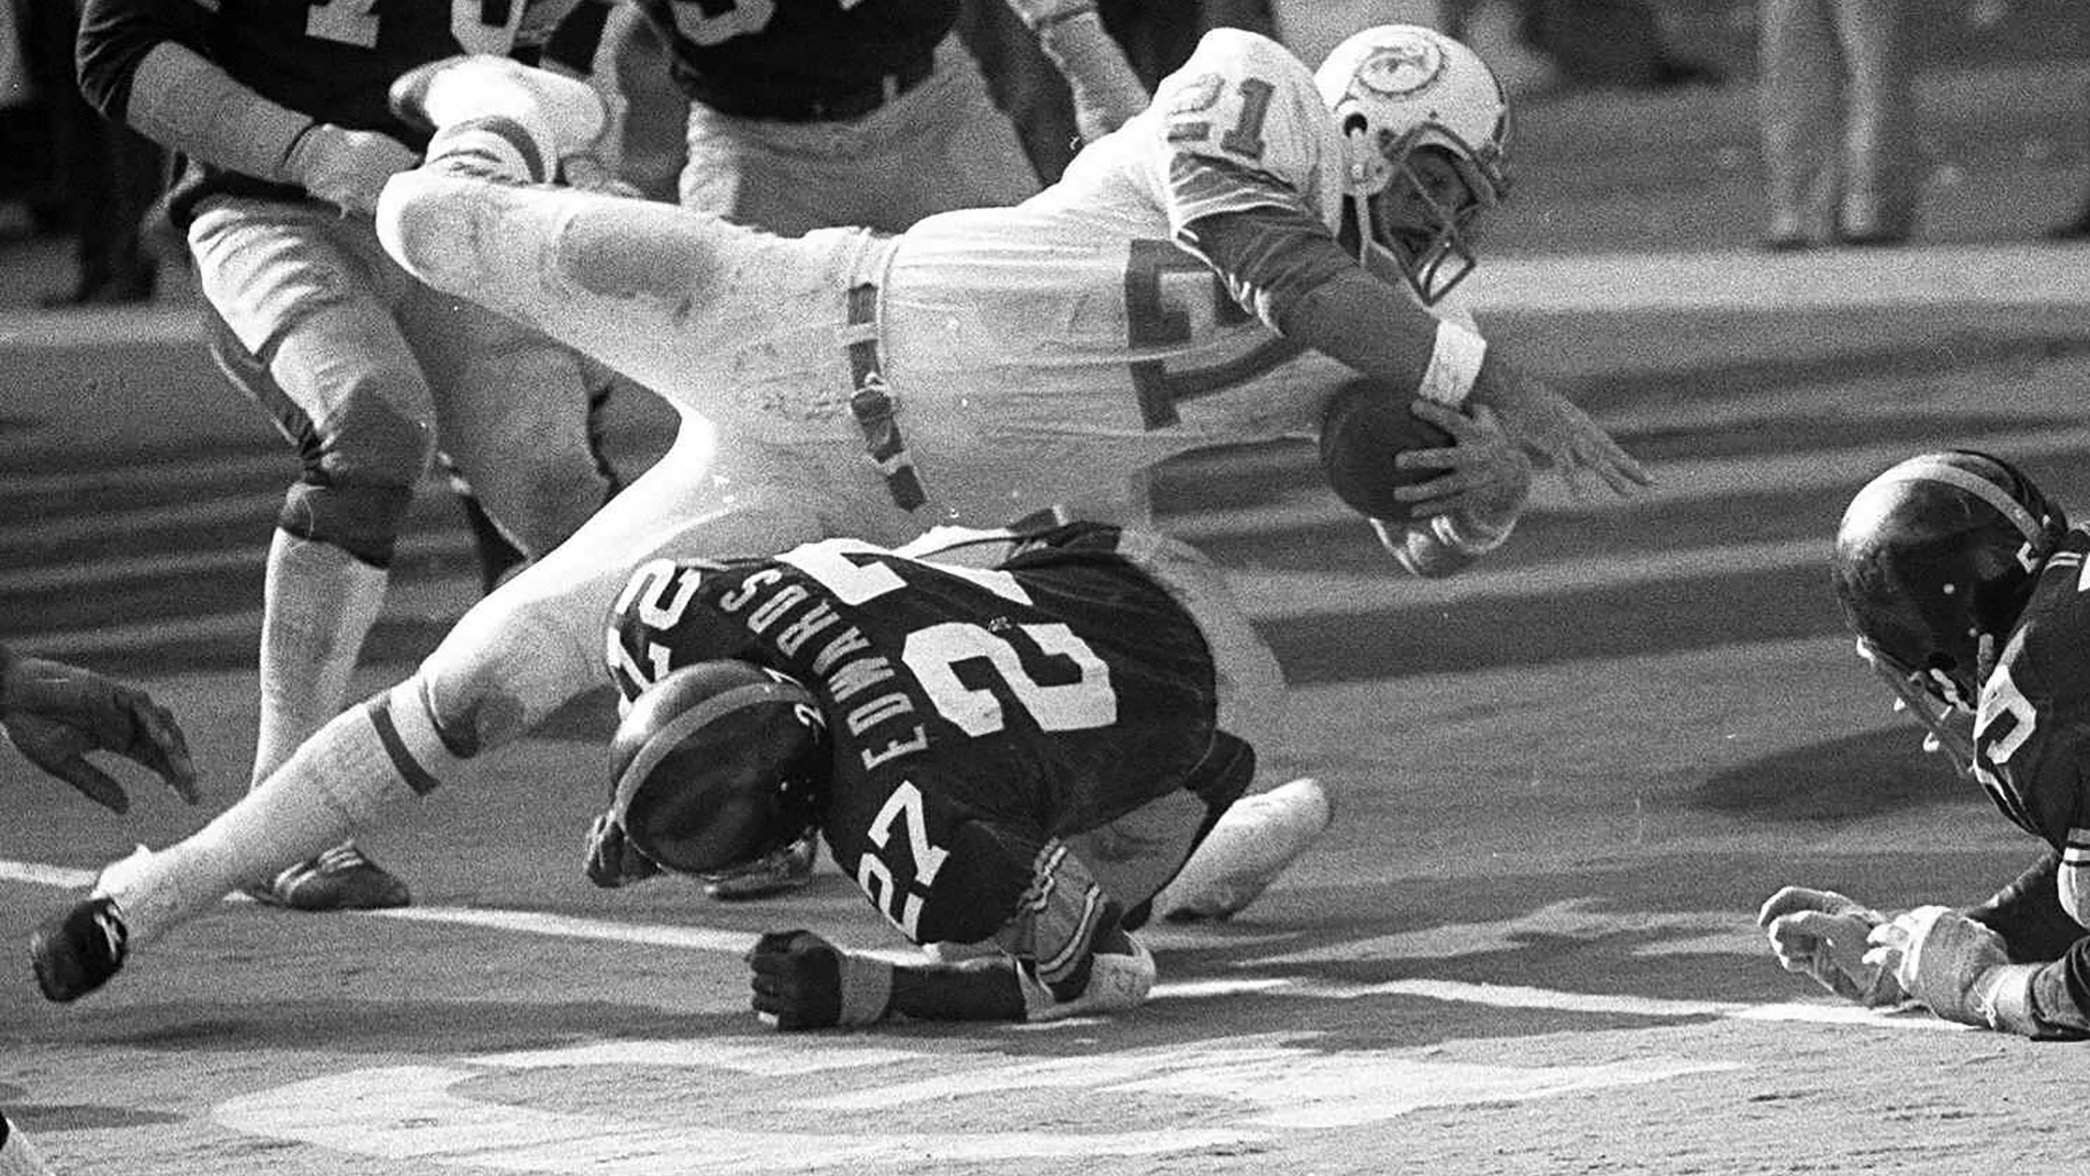 Jim Kiick, a key player for undefeated Dolphins, dies at 73